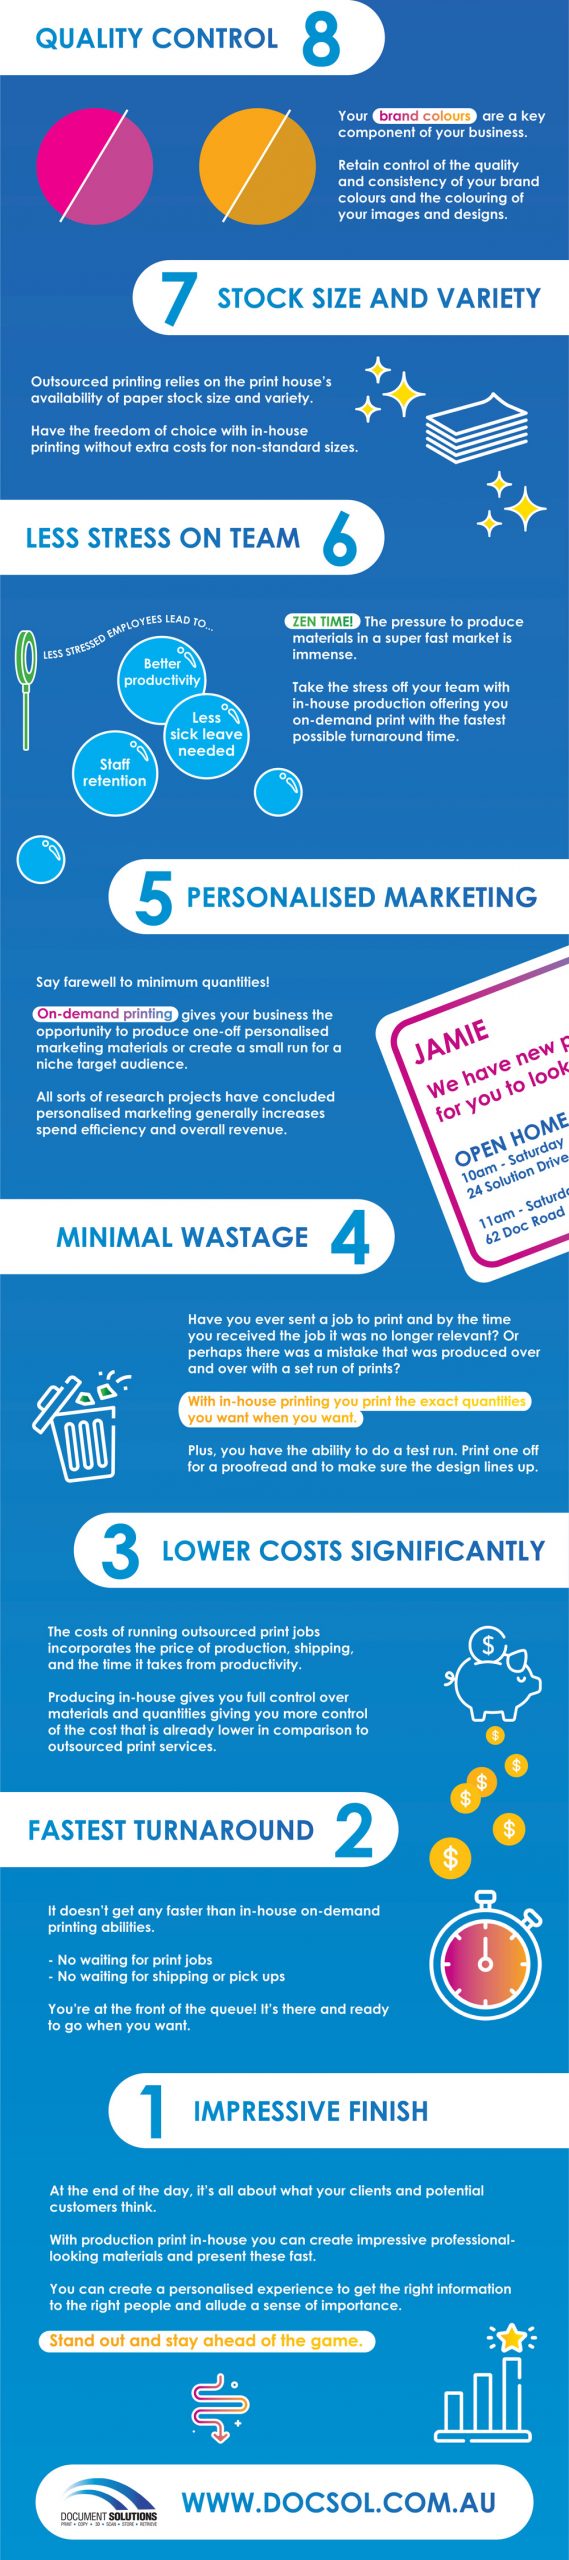 Infographic of top 8 reasons to go in-house with production print: quality control, paper variety, less stress, personalised marketing, minimal wastage, lower costs, fastest turnaround, and impressive finish. www.docsol.com.au 